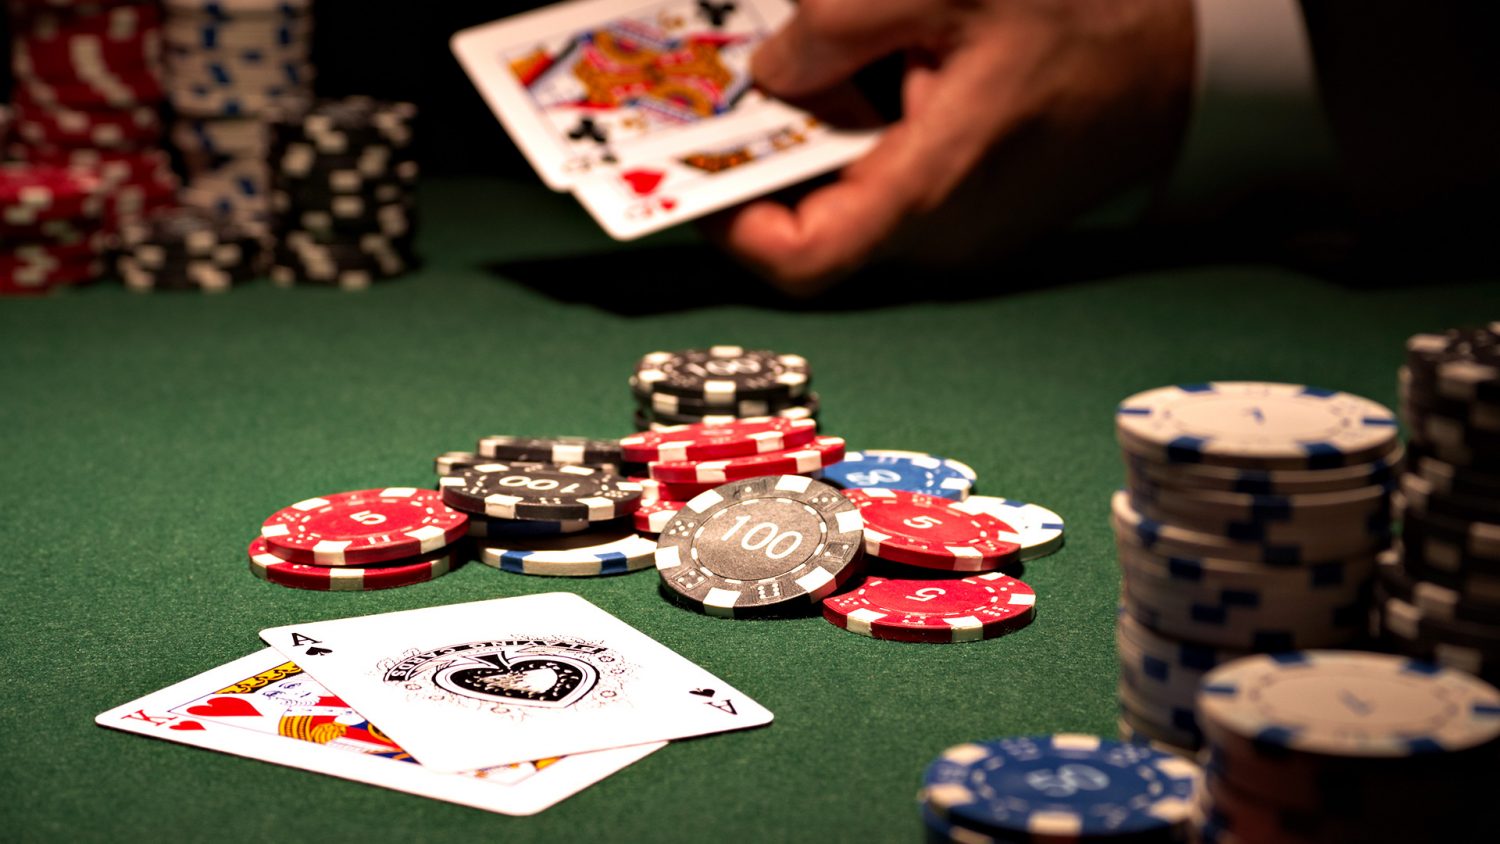 What are the advantages of playing online casino games?